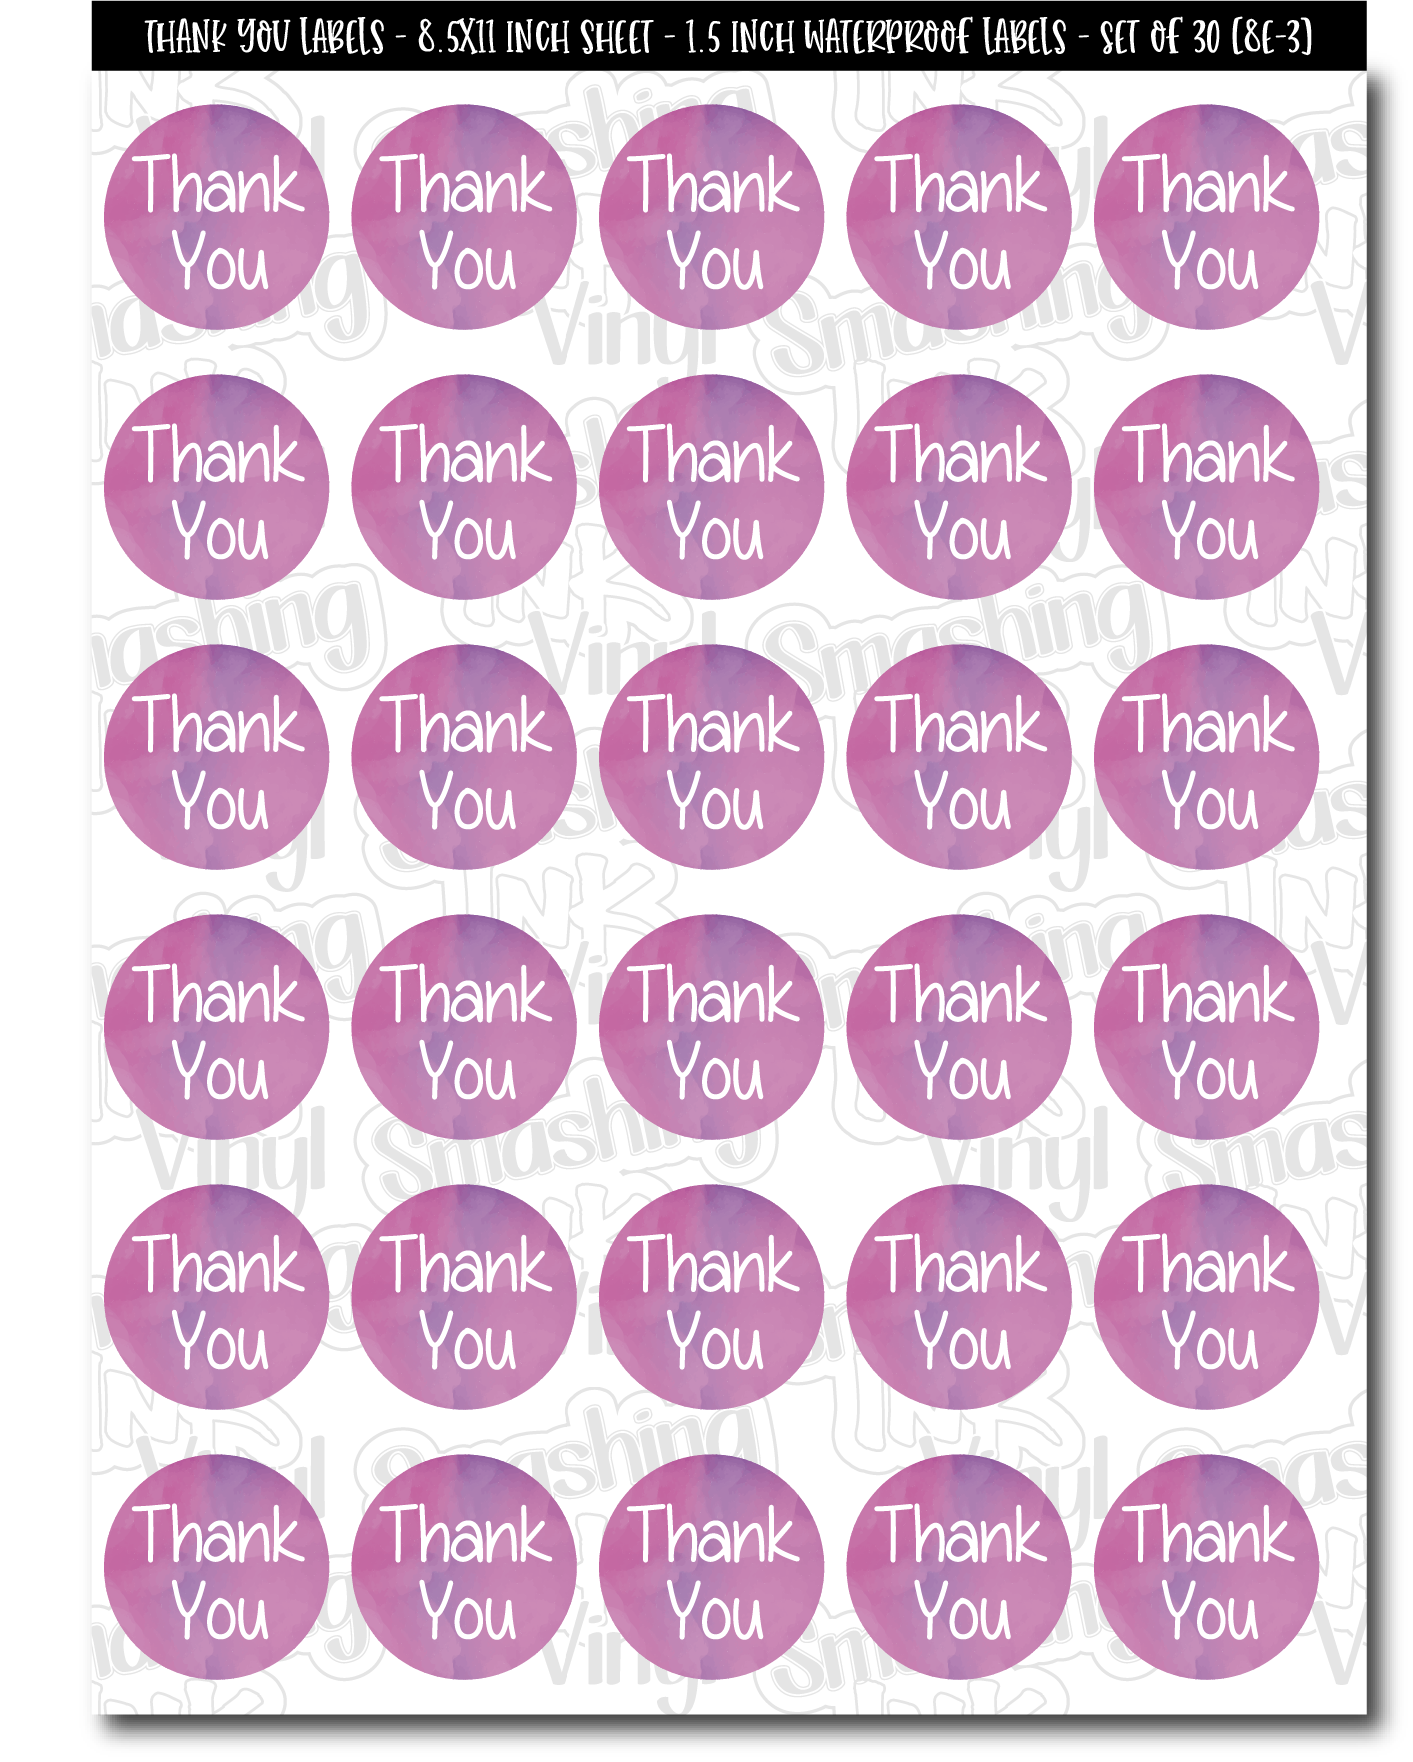 Pink Thank You - Packaging Labels (SHIPS IN 3-7 BUS DAYS)